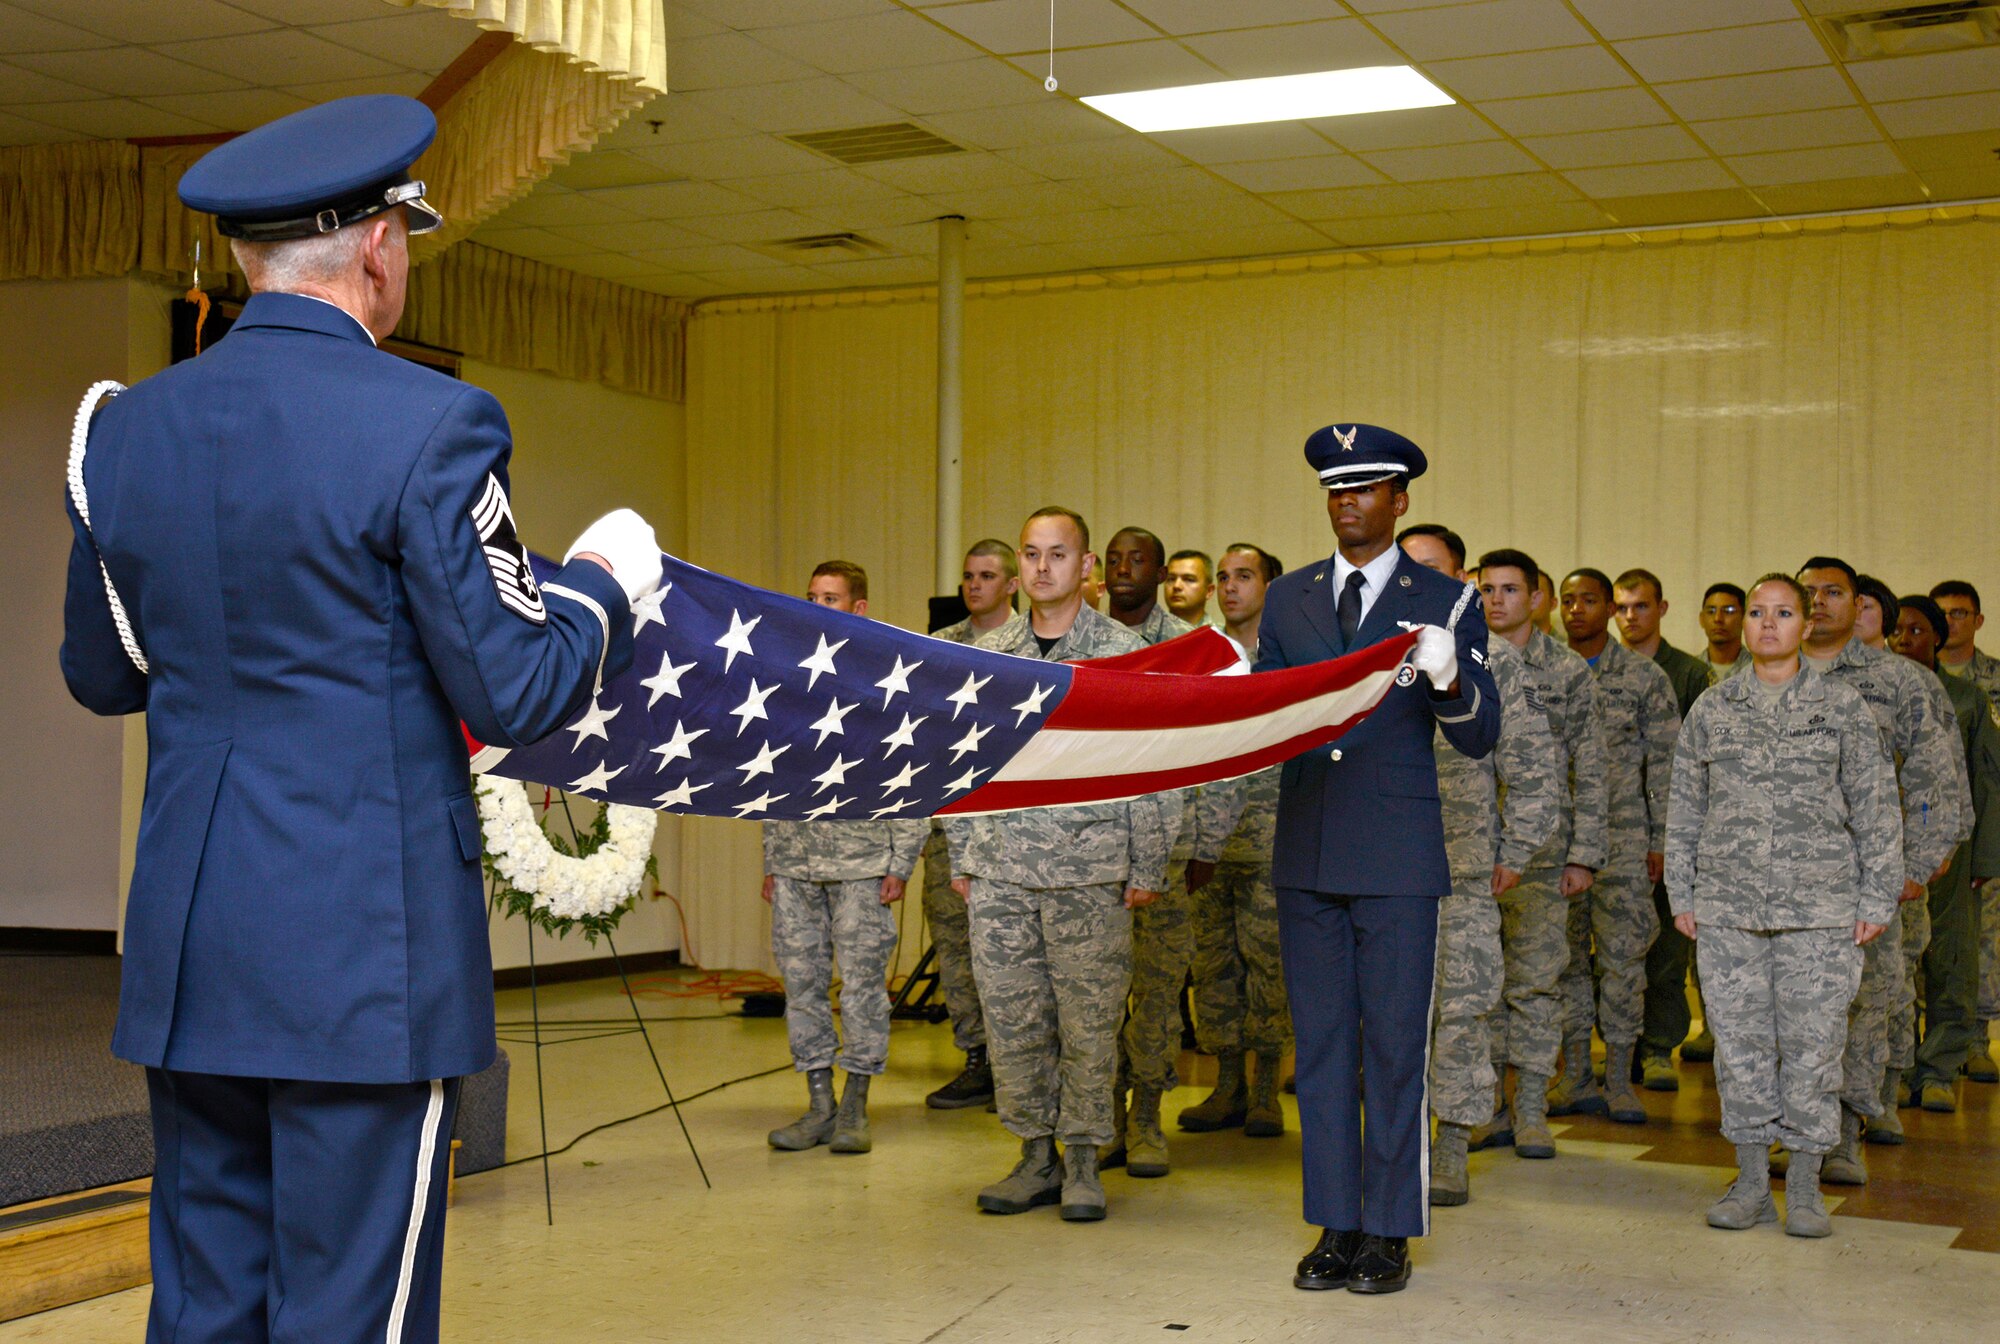 Members of the Tinker Honor Guard perform a flag-folding ceremony in front of members of Team Tinker at the Del City American Legion and VFW Post 9969 Sept. 16 as part of a POW/MIA Retreat ceremony. (Air Force photo by Kelly White)